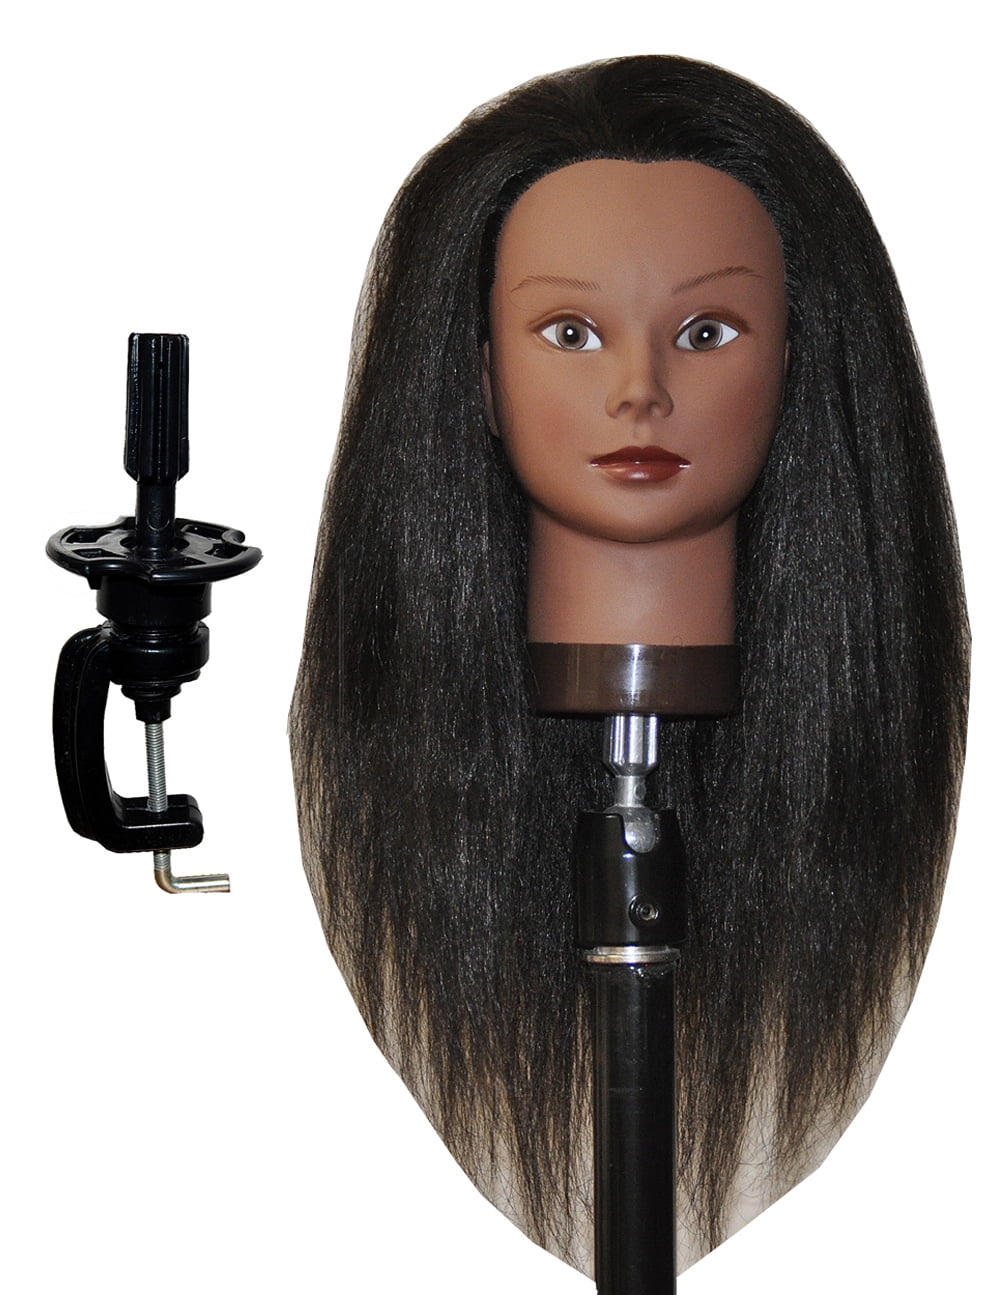 Mannequin Head with 100% Real Hair, Cenoz 18 Hairdresser Cosmetology  Training Head with Stand and Tool, Manikin Training Practice Head, Doll  Head for